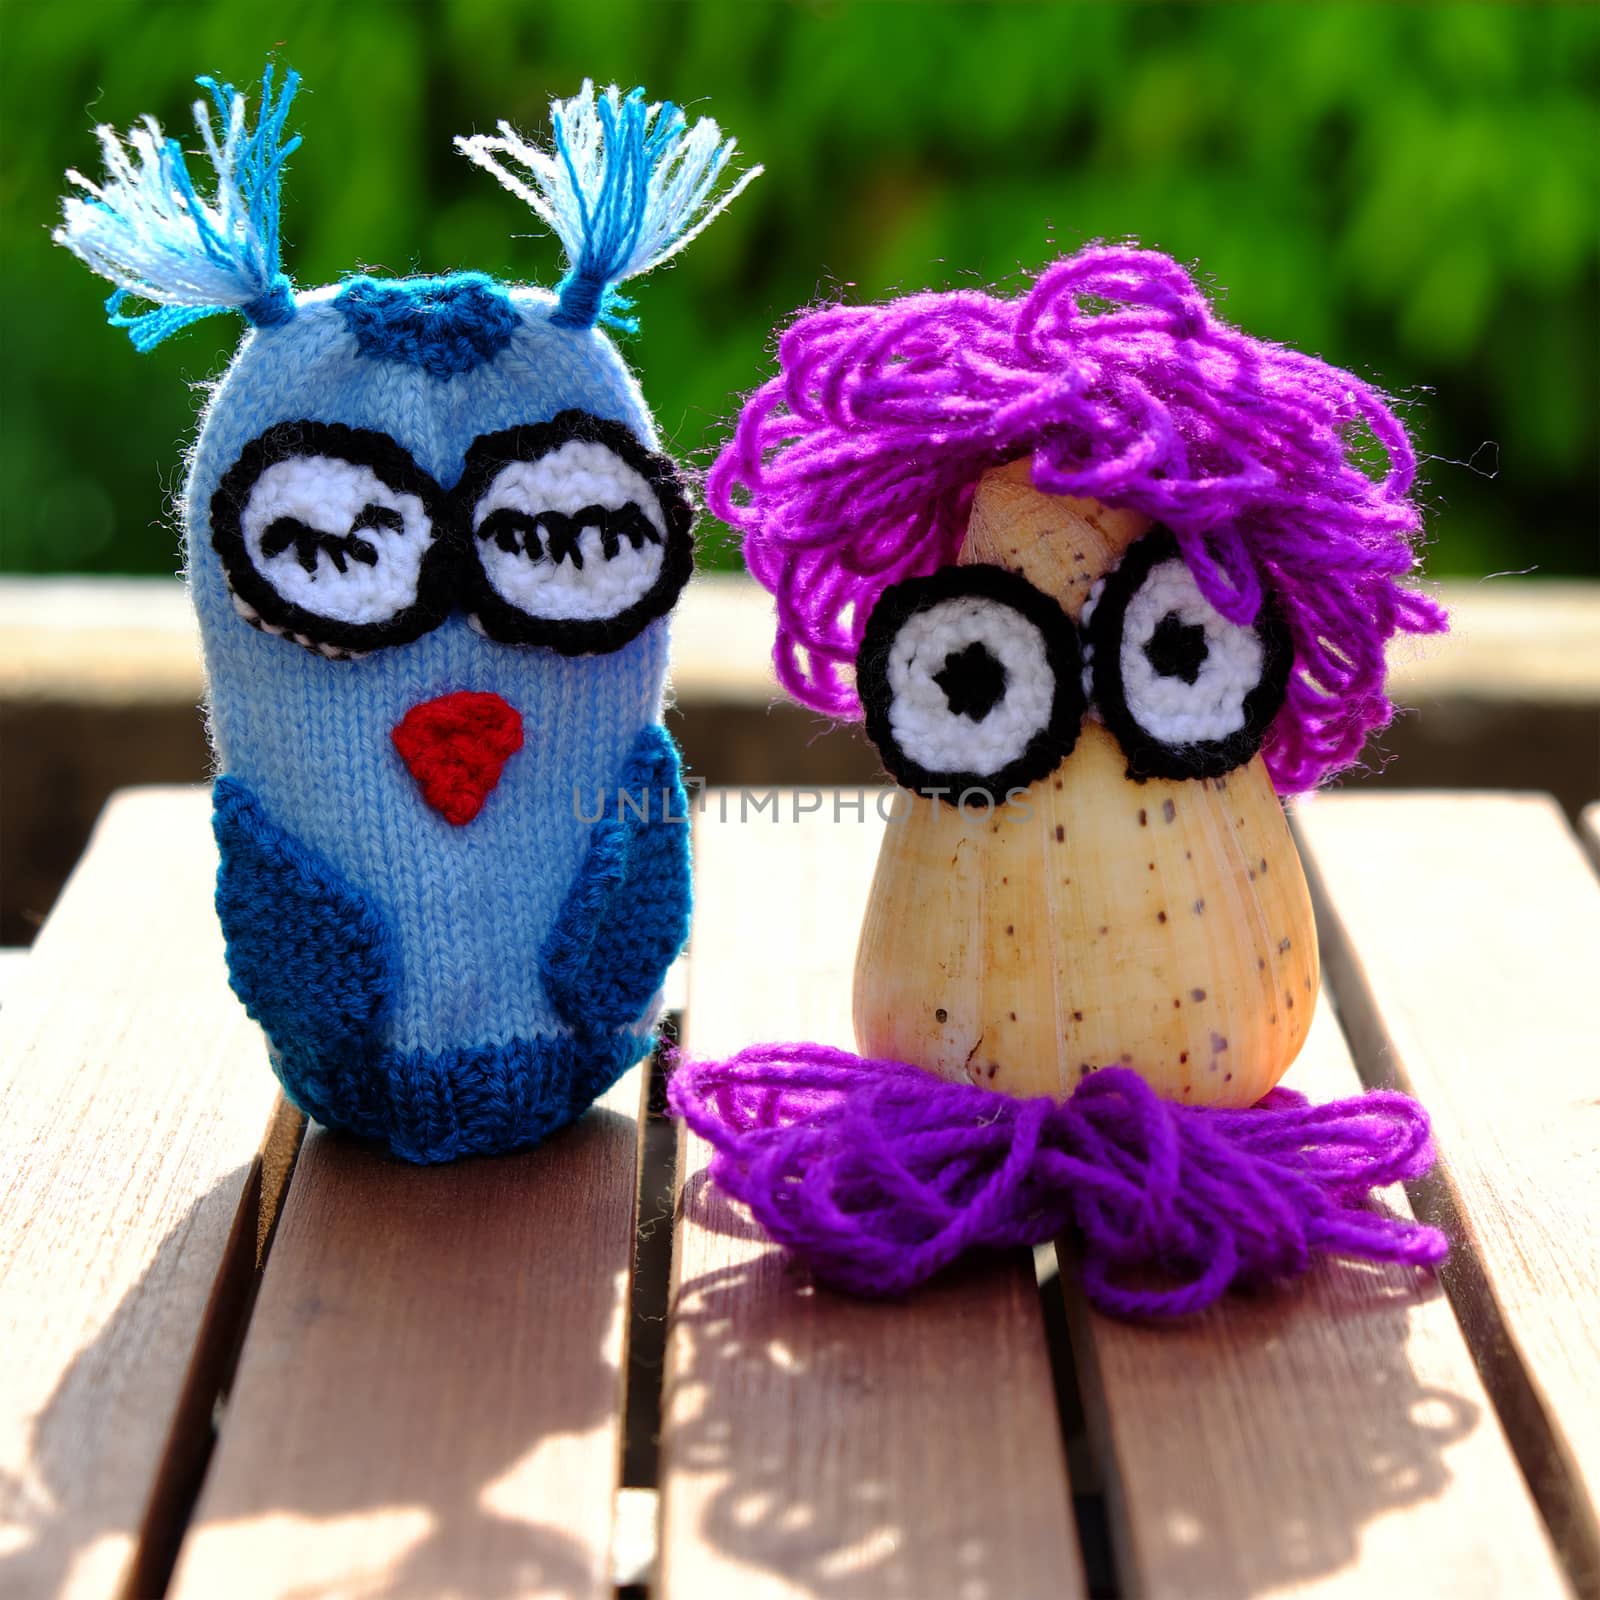 colorful owls puppet knit from yarn, owl make from conch shell, diy toy, funny creative on outdoor green background 